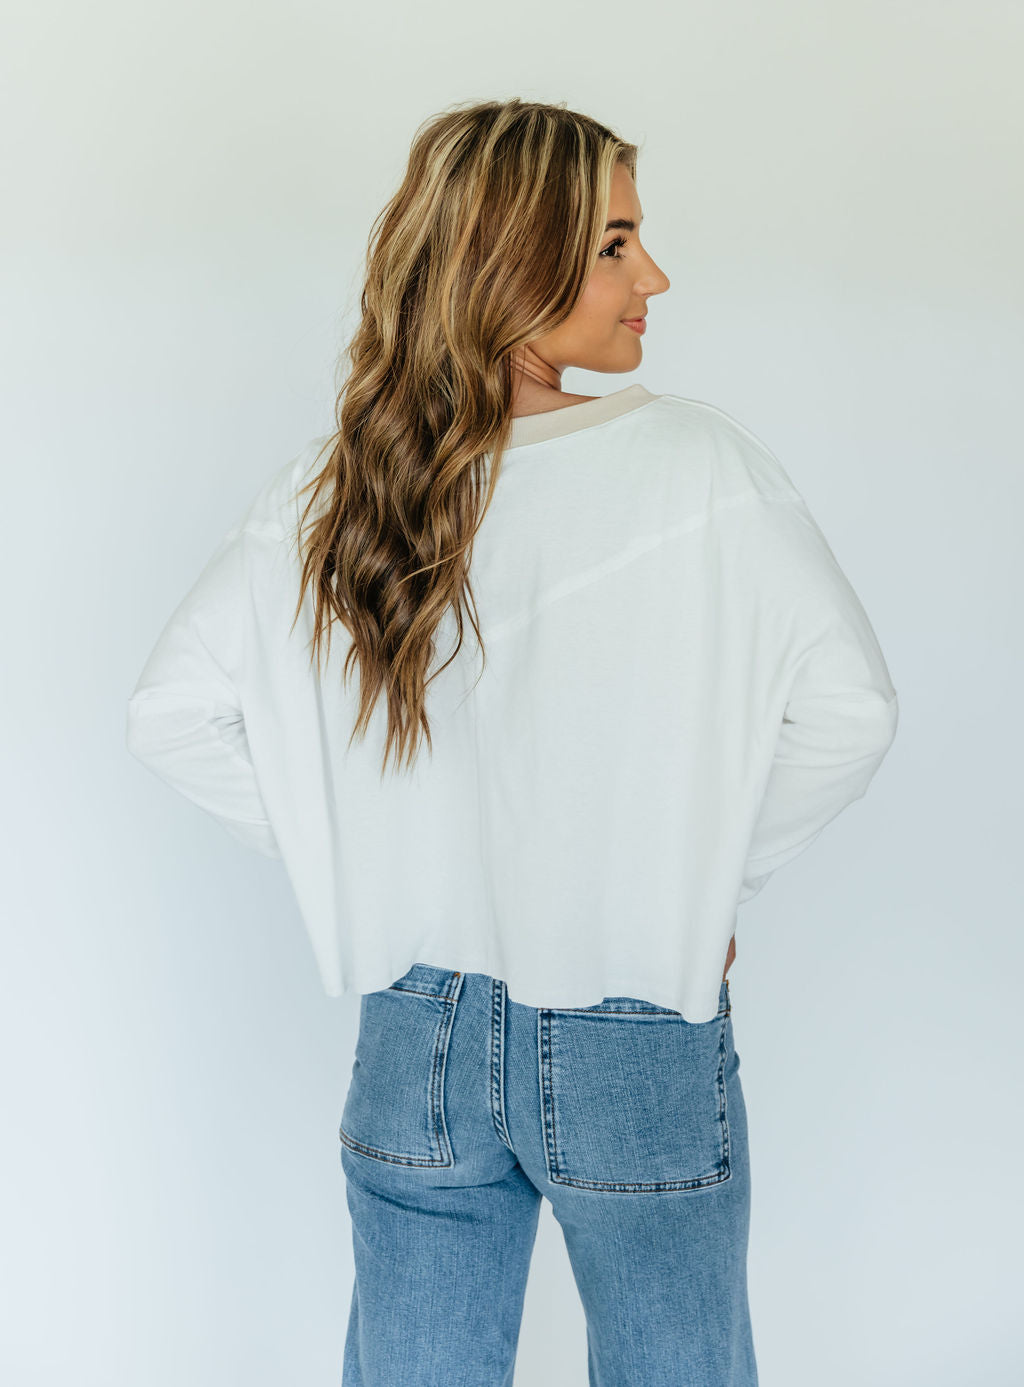 The Rae Cropped Top